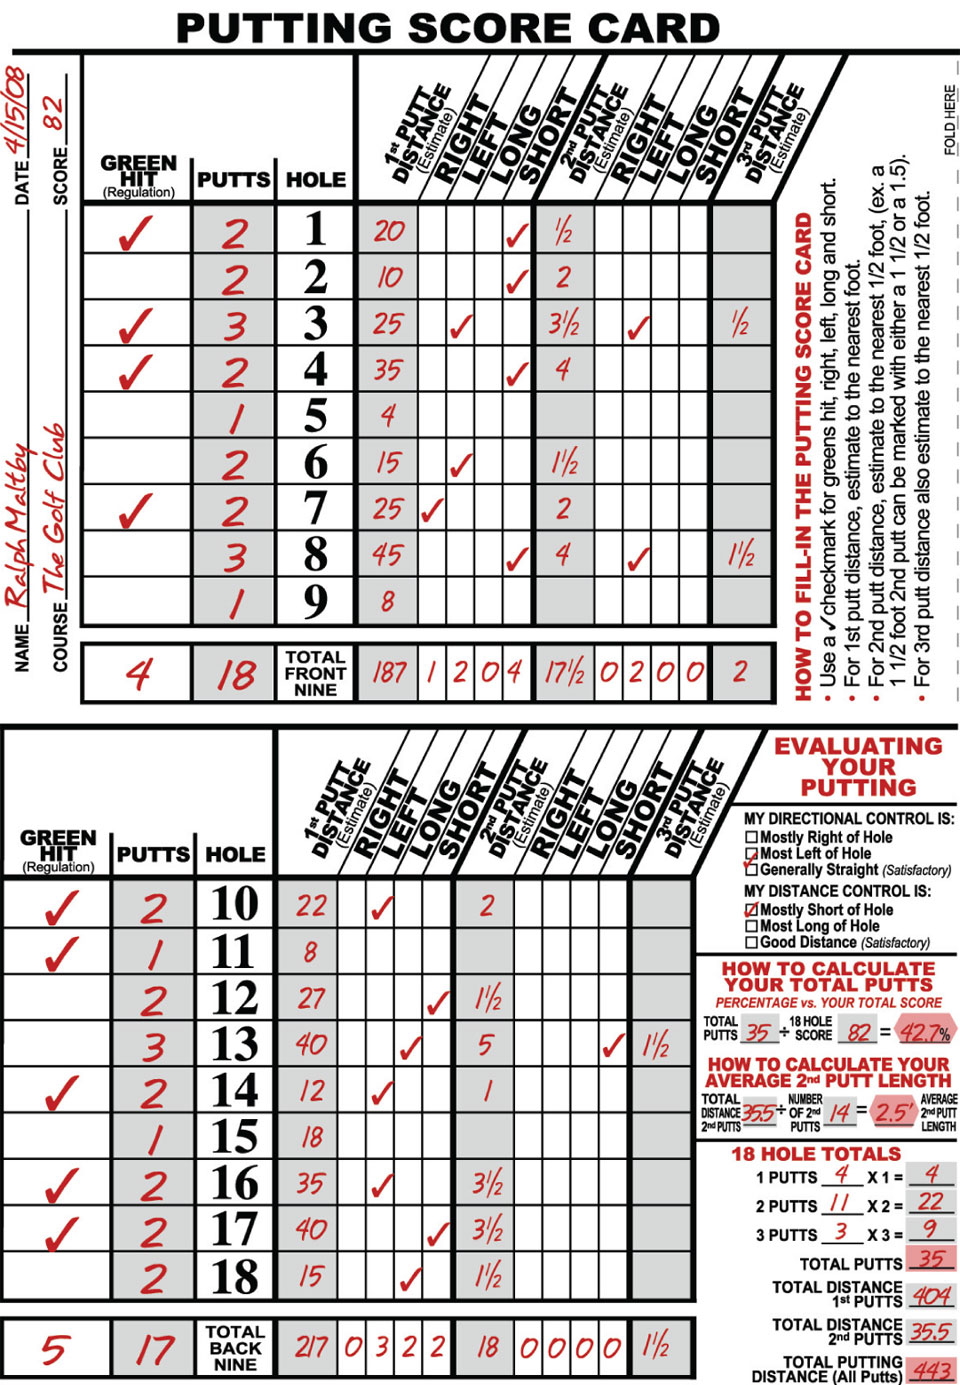 Putting Score Card Example